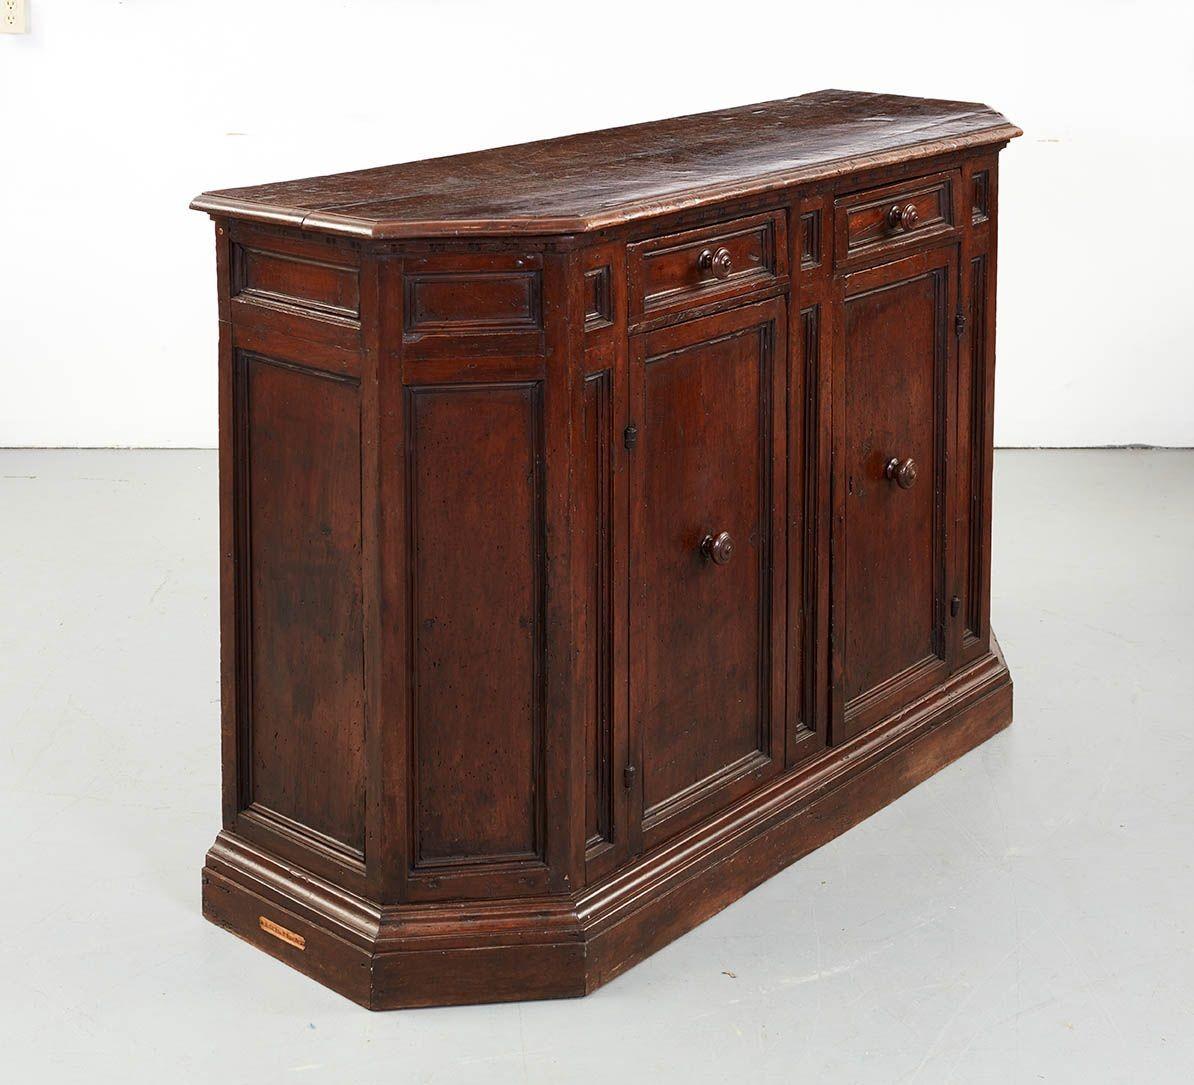 Substantial Italian Baroque walnut credenza, the top with thumb molded edge and canted corners over conforming cabinet with two drawers over two cupboard doors, the whole with good moldings, deep rich patina and impressive presence. Probably Tuscan,